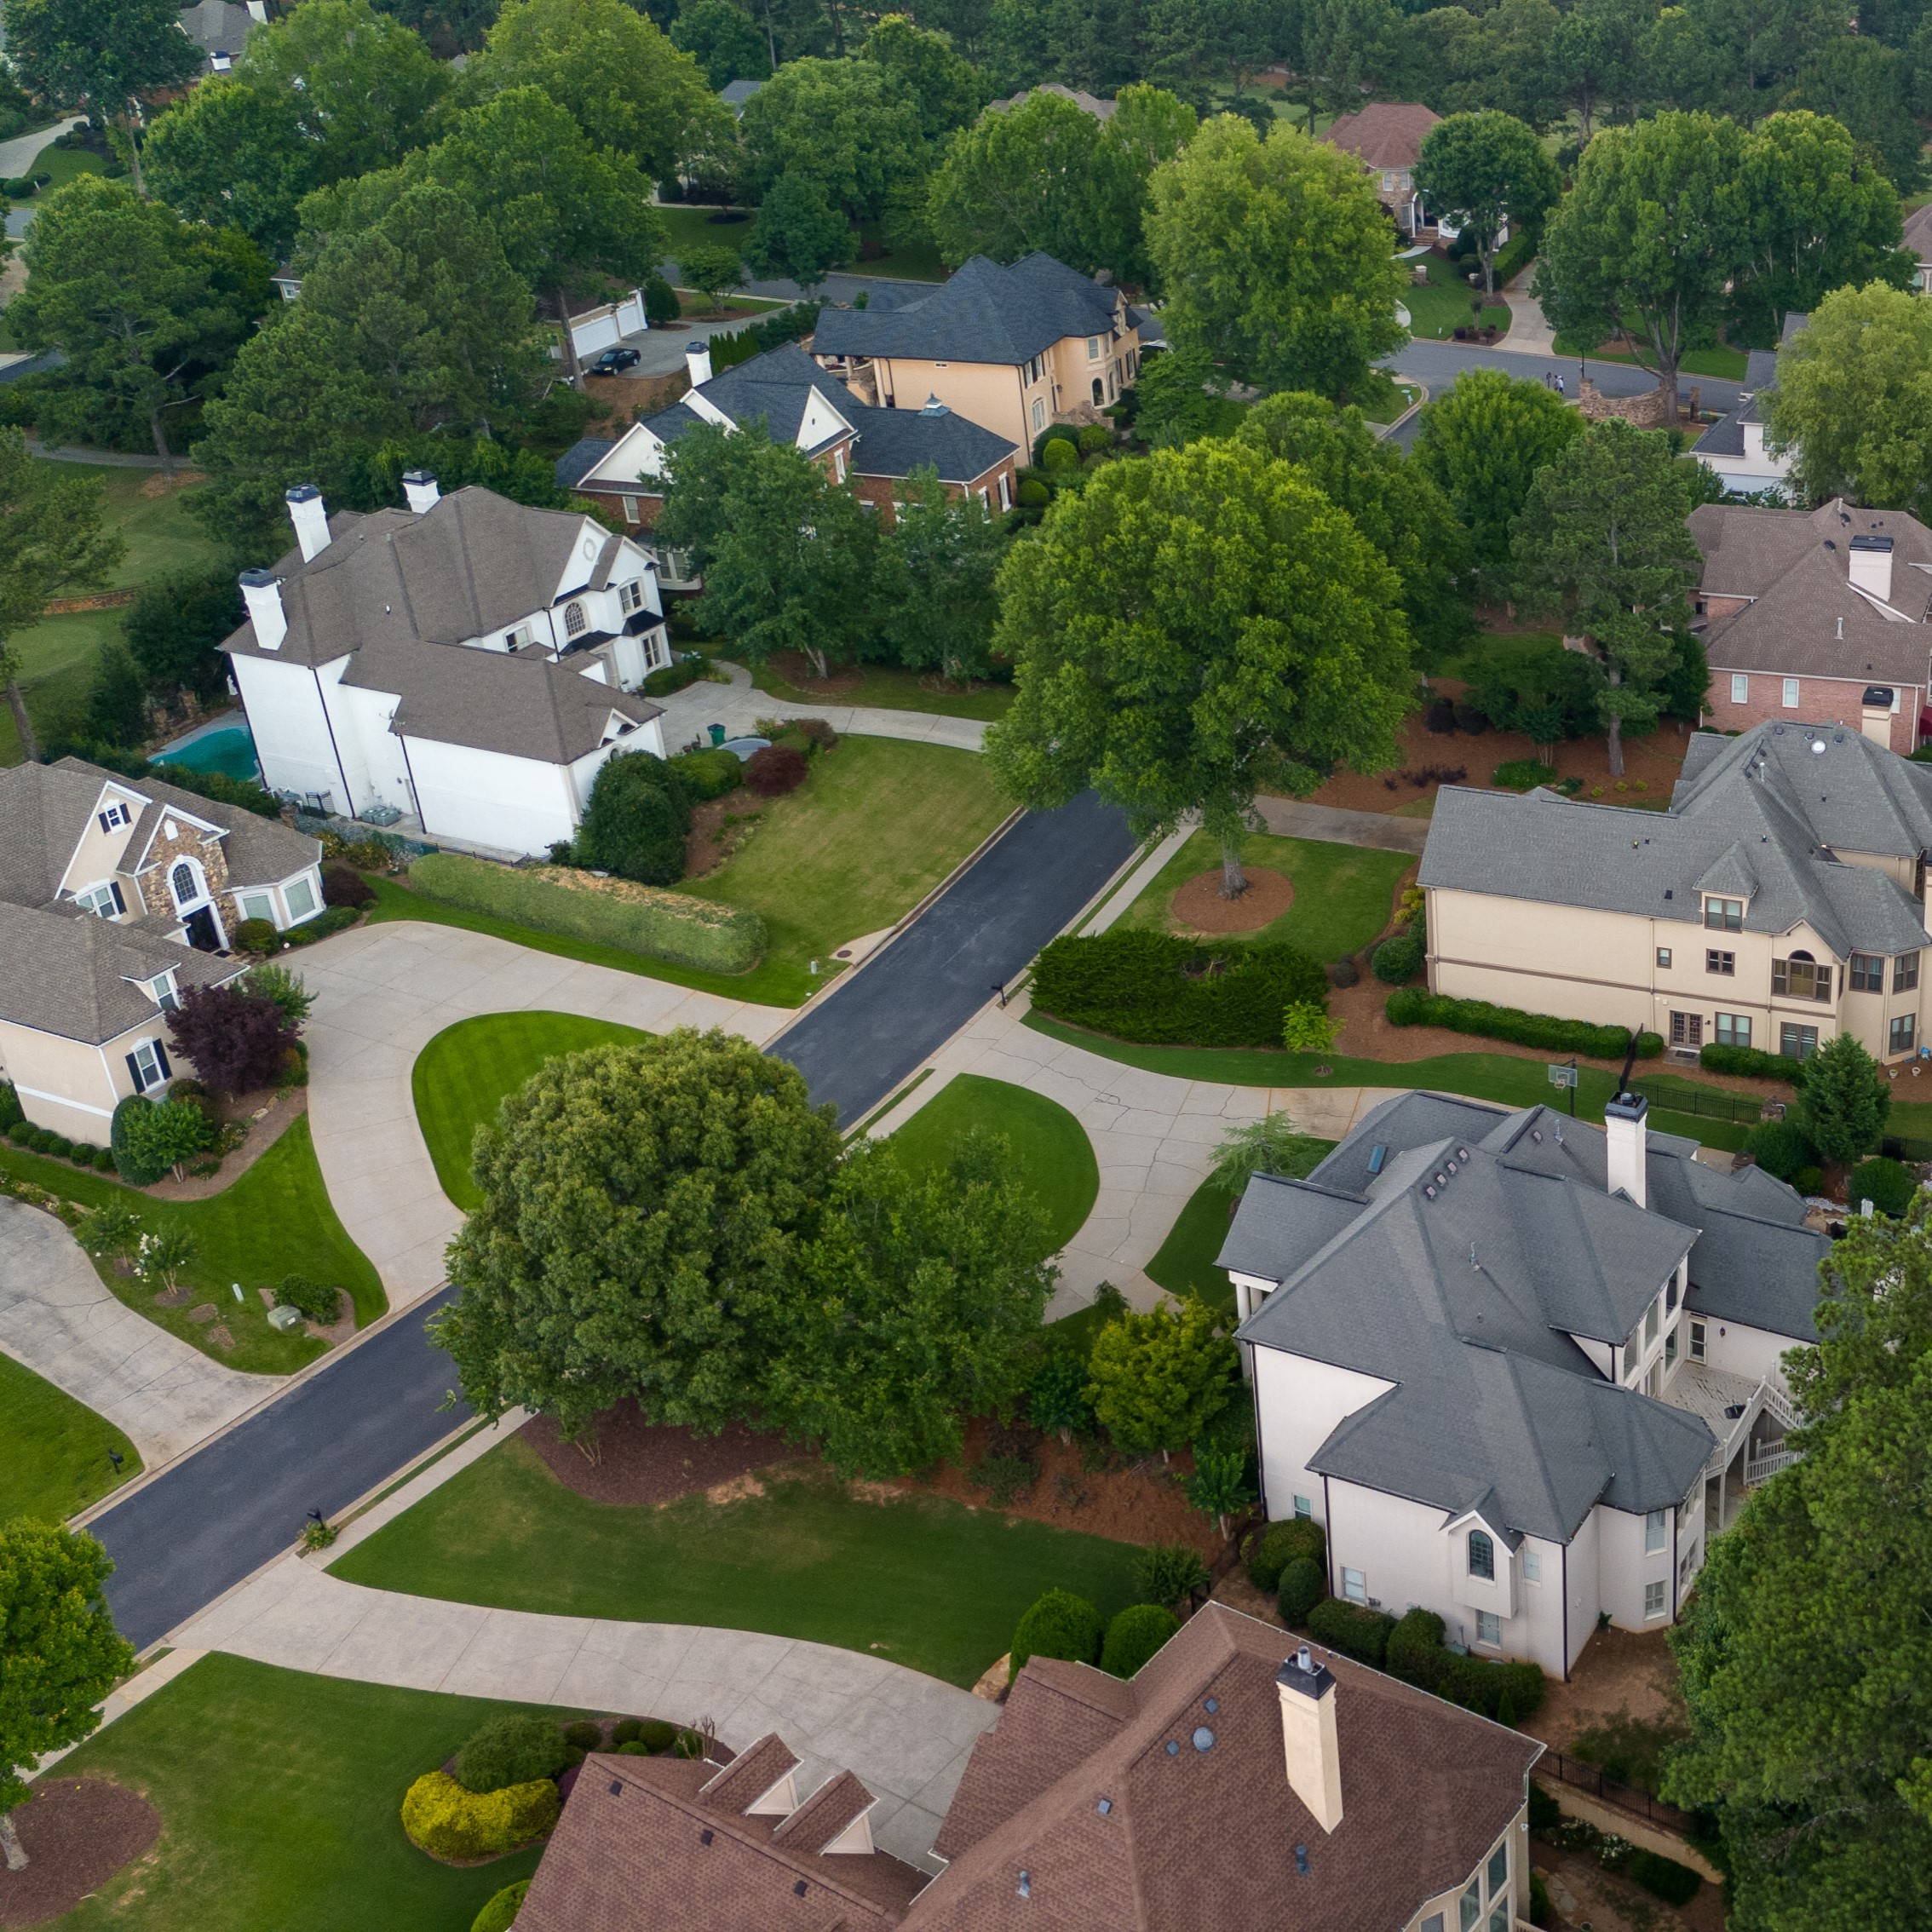 New ranking of nation's wealthiest suburbs has a few from Chicago area